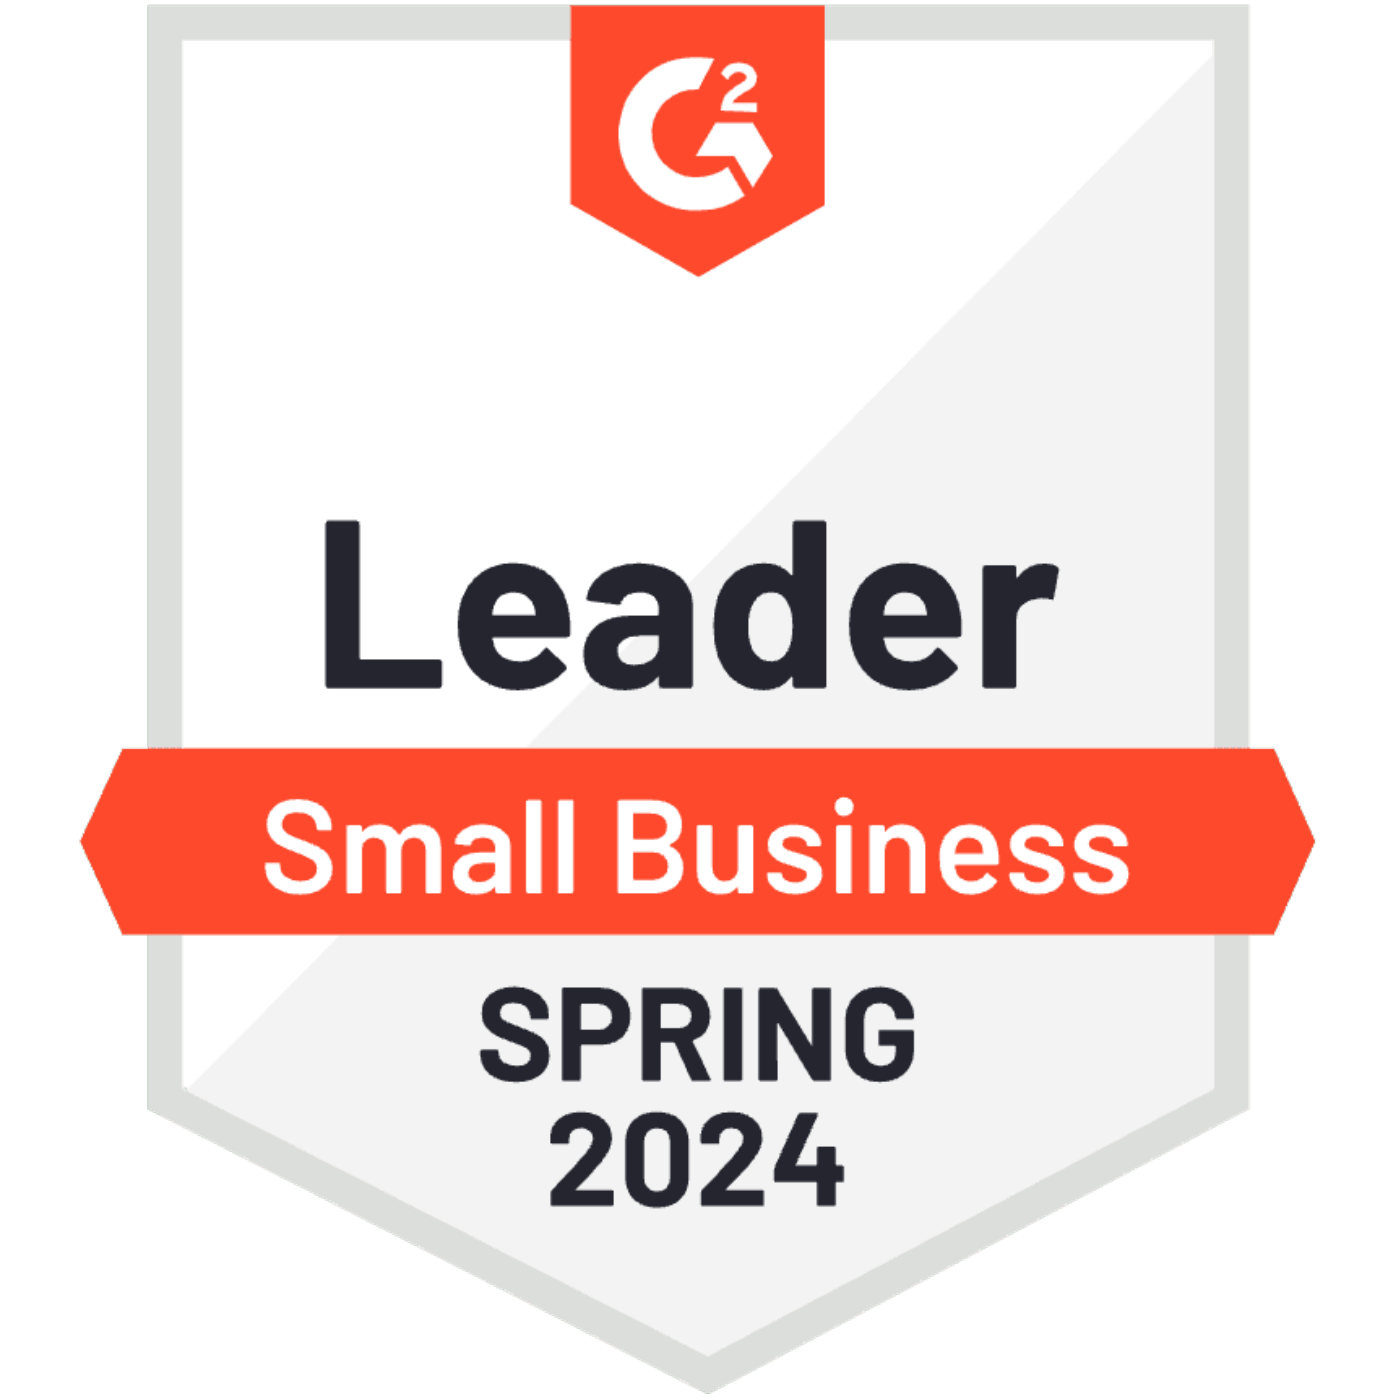 G2_Leader_Small_Business_Spring_2024_600_600